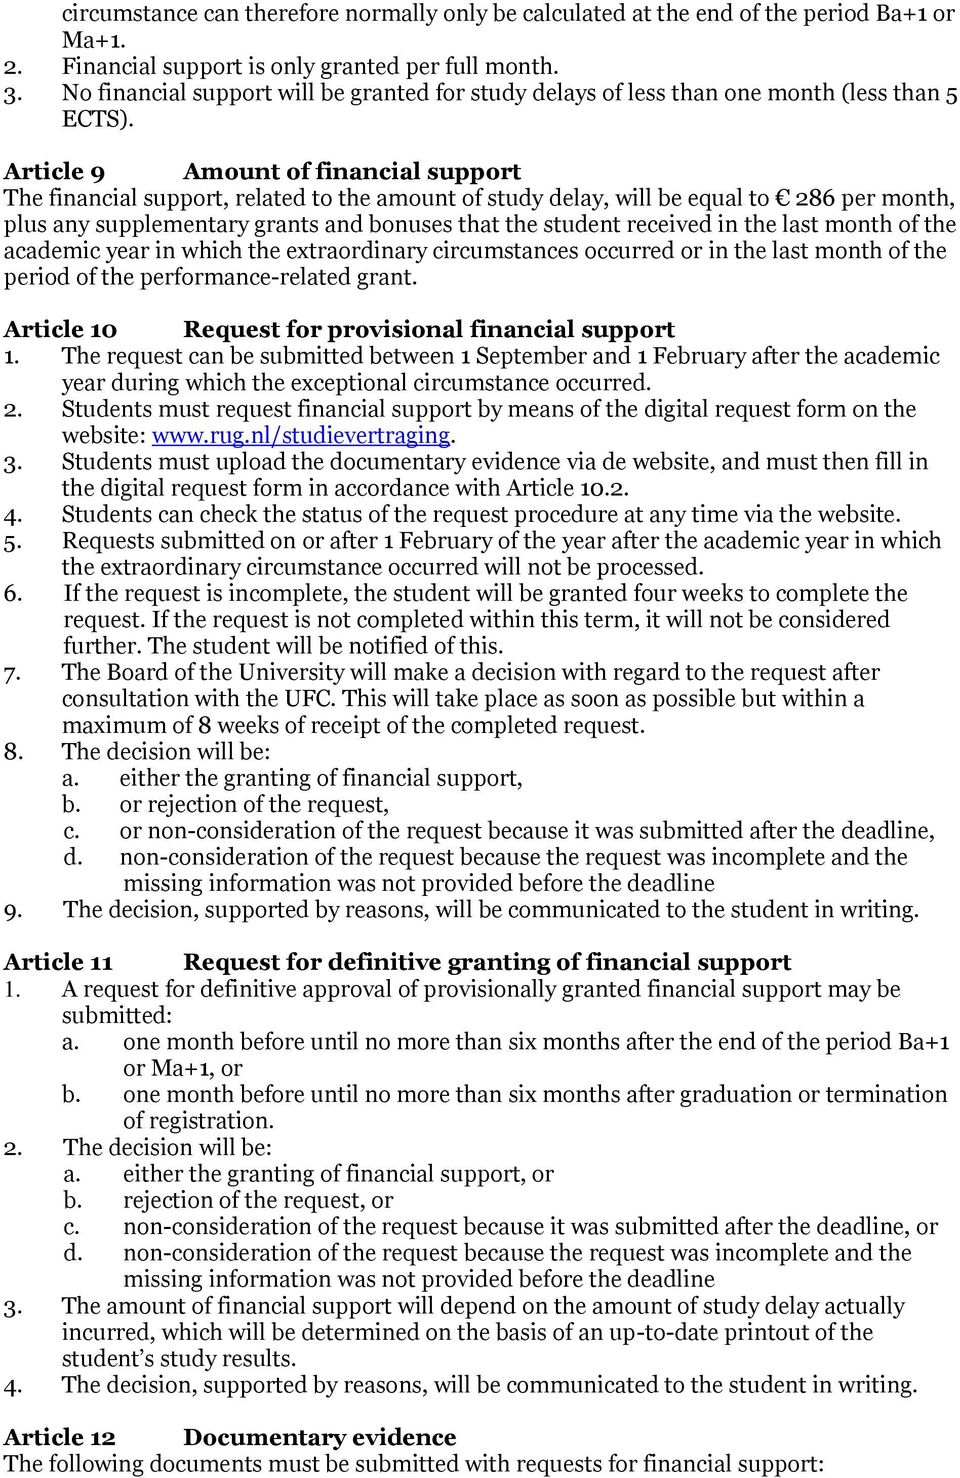 Article 9 Amount of financial support The financial support, related to the amount of study delay, will be equal to 286 per month, plus any supplementary grants and bonuses that the student received